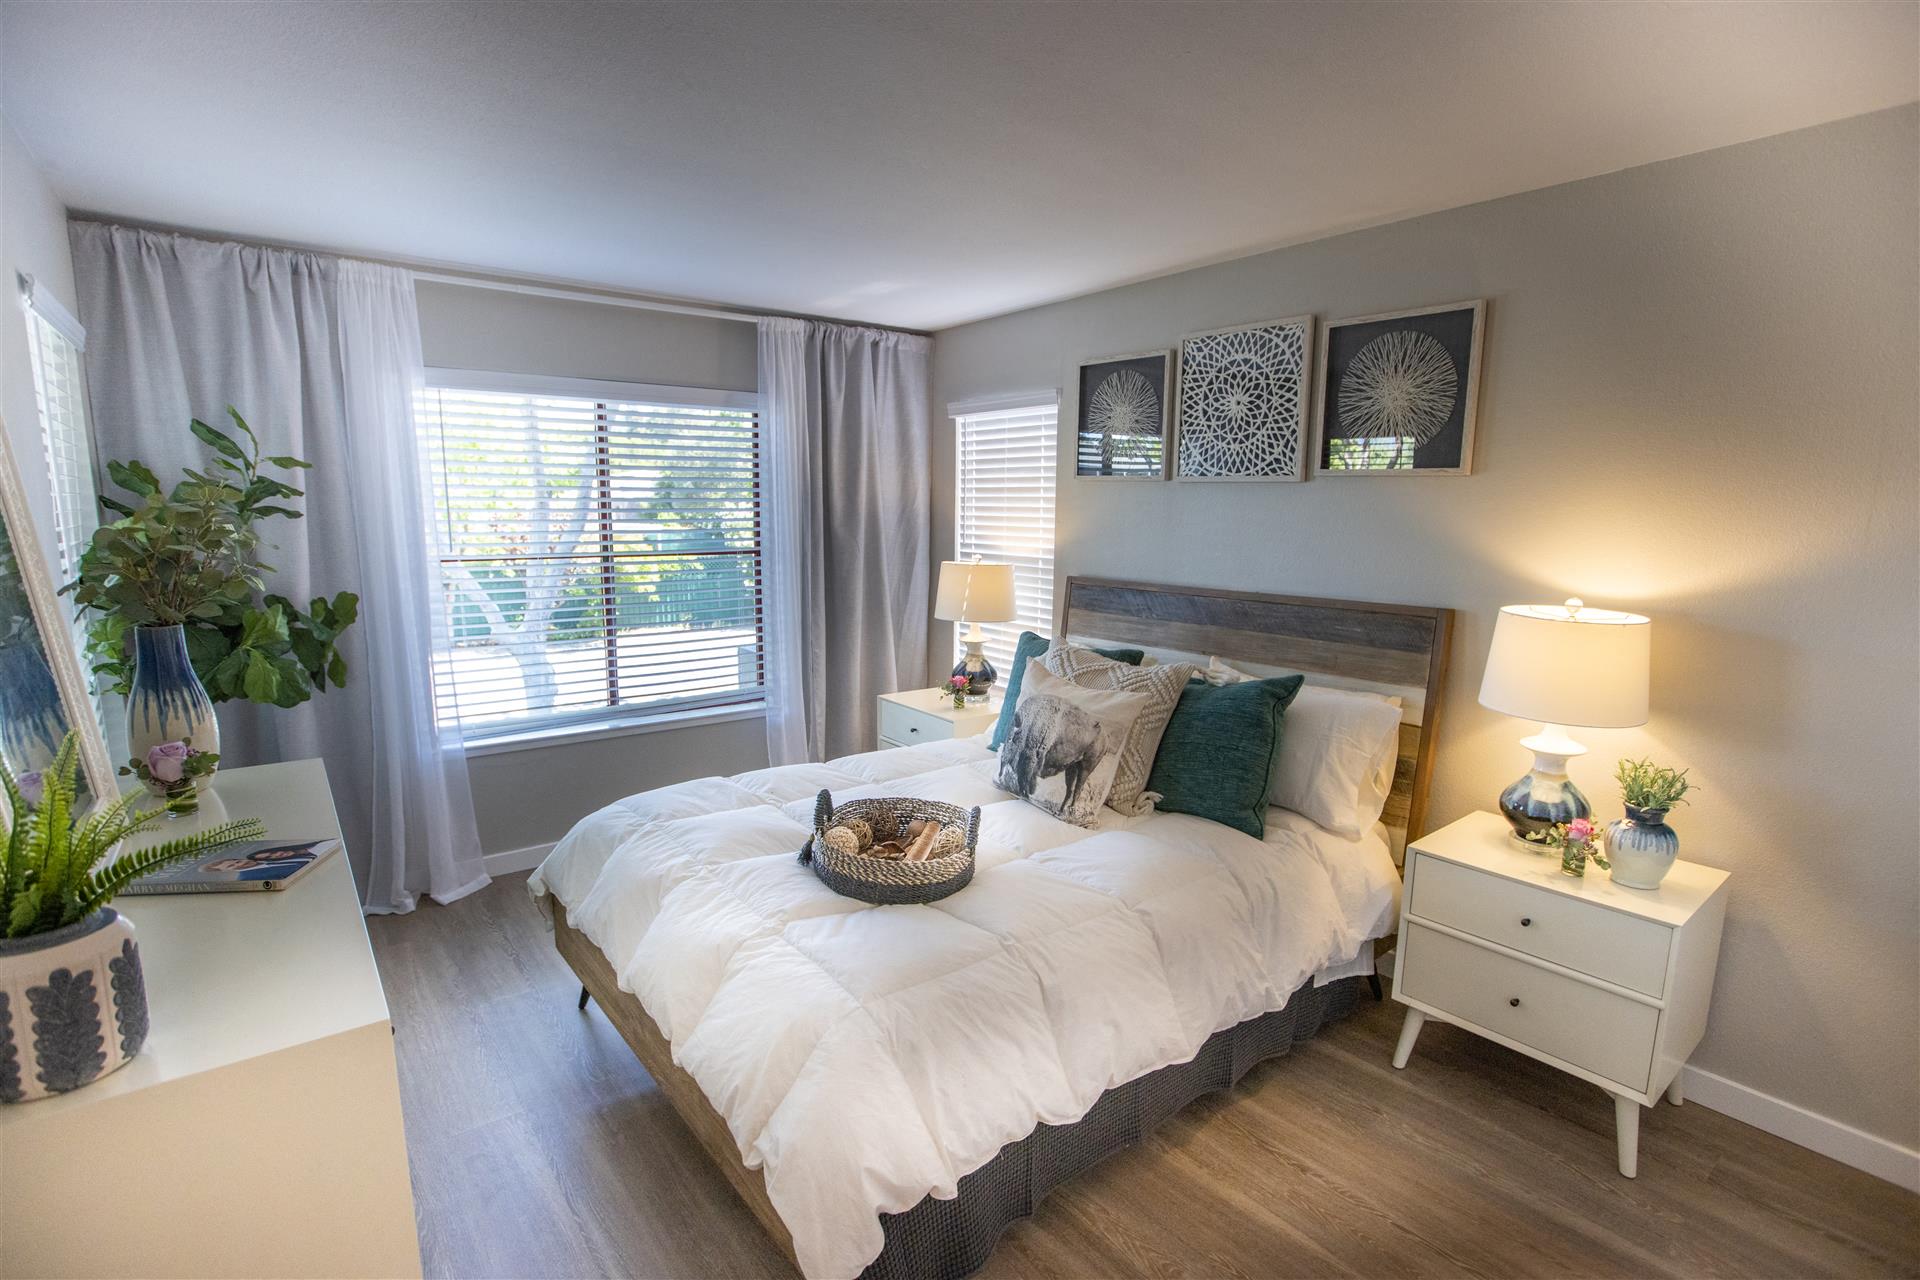 Beautiful Bright Bedroom With Wide Windows at Cogir of Sonoma, California, 95476